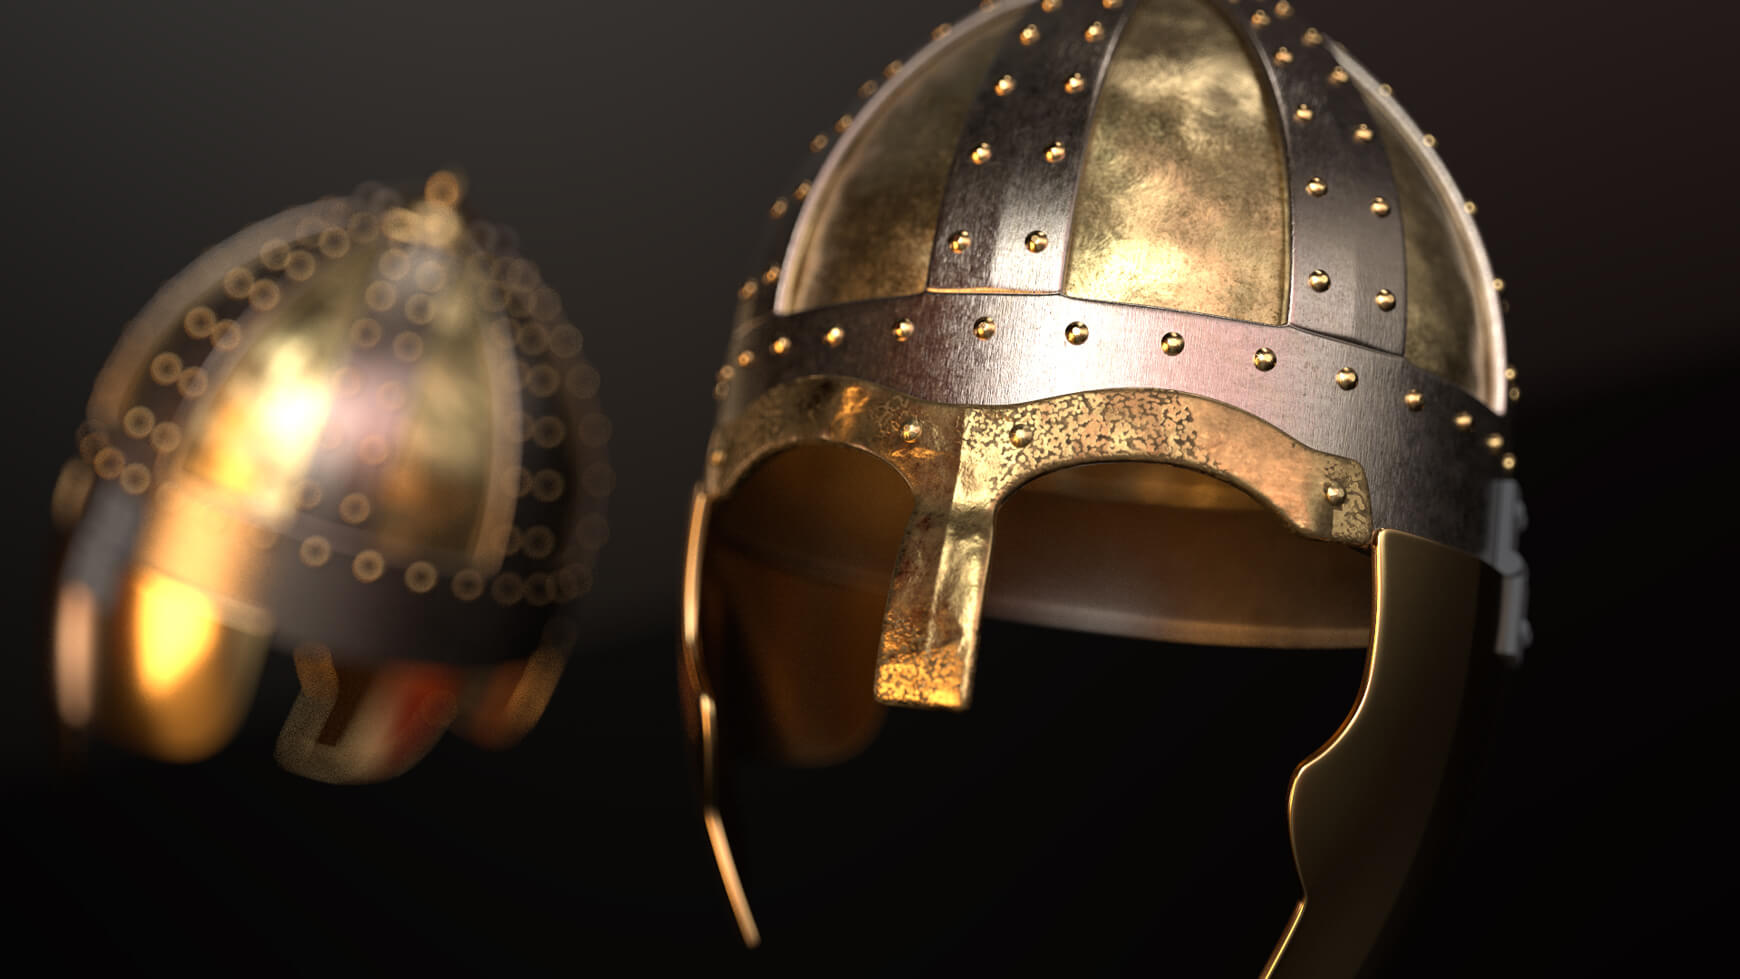 Imperfect Metals Collection for Redshift RS Maxon Cinema 4D